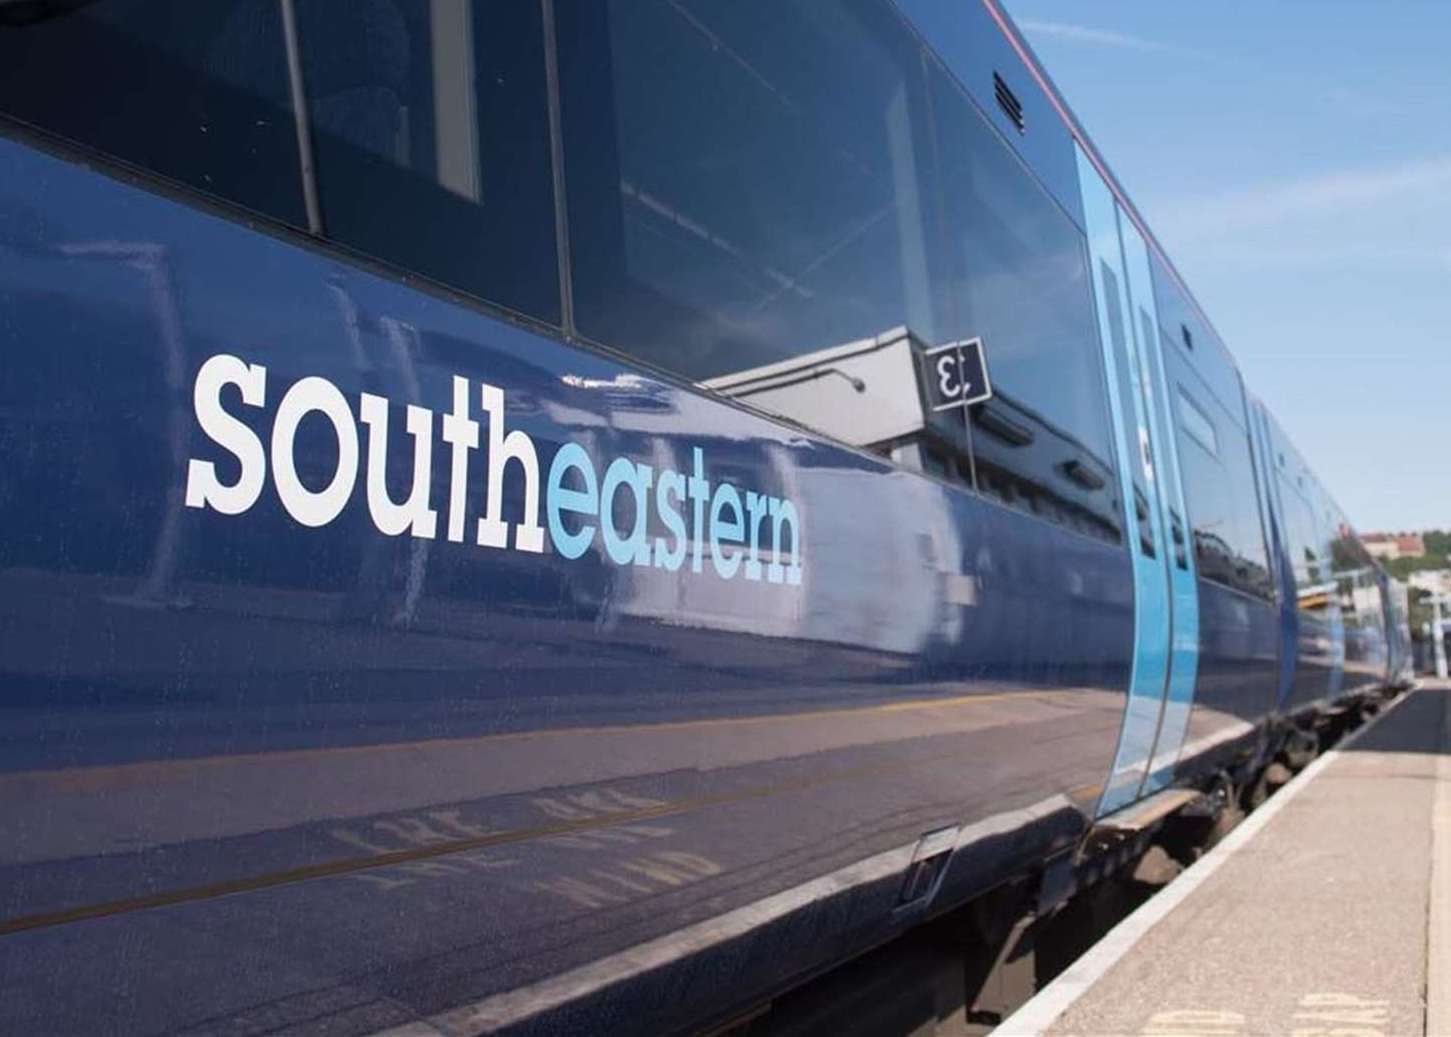 Southeastern services were delayed through Gillingham due to an incident